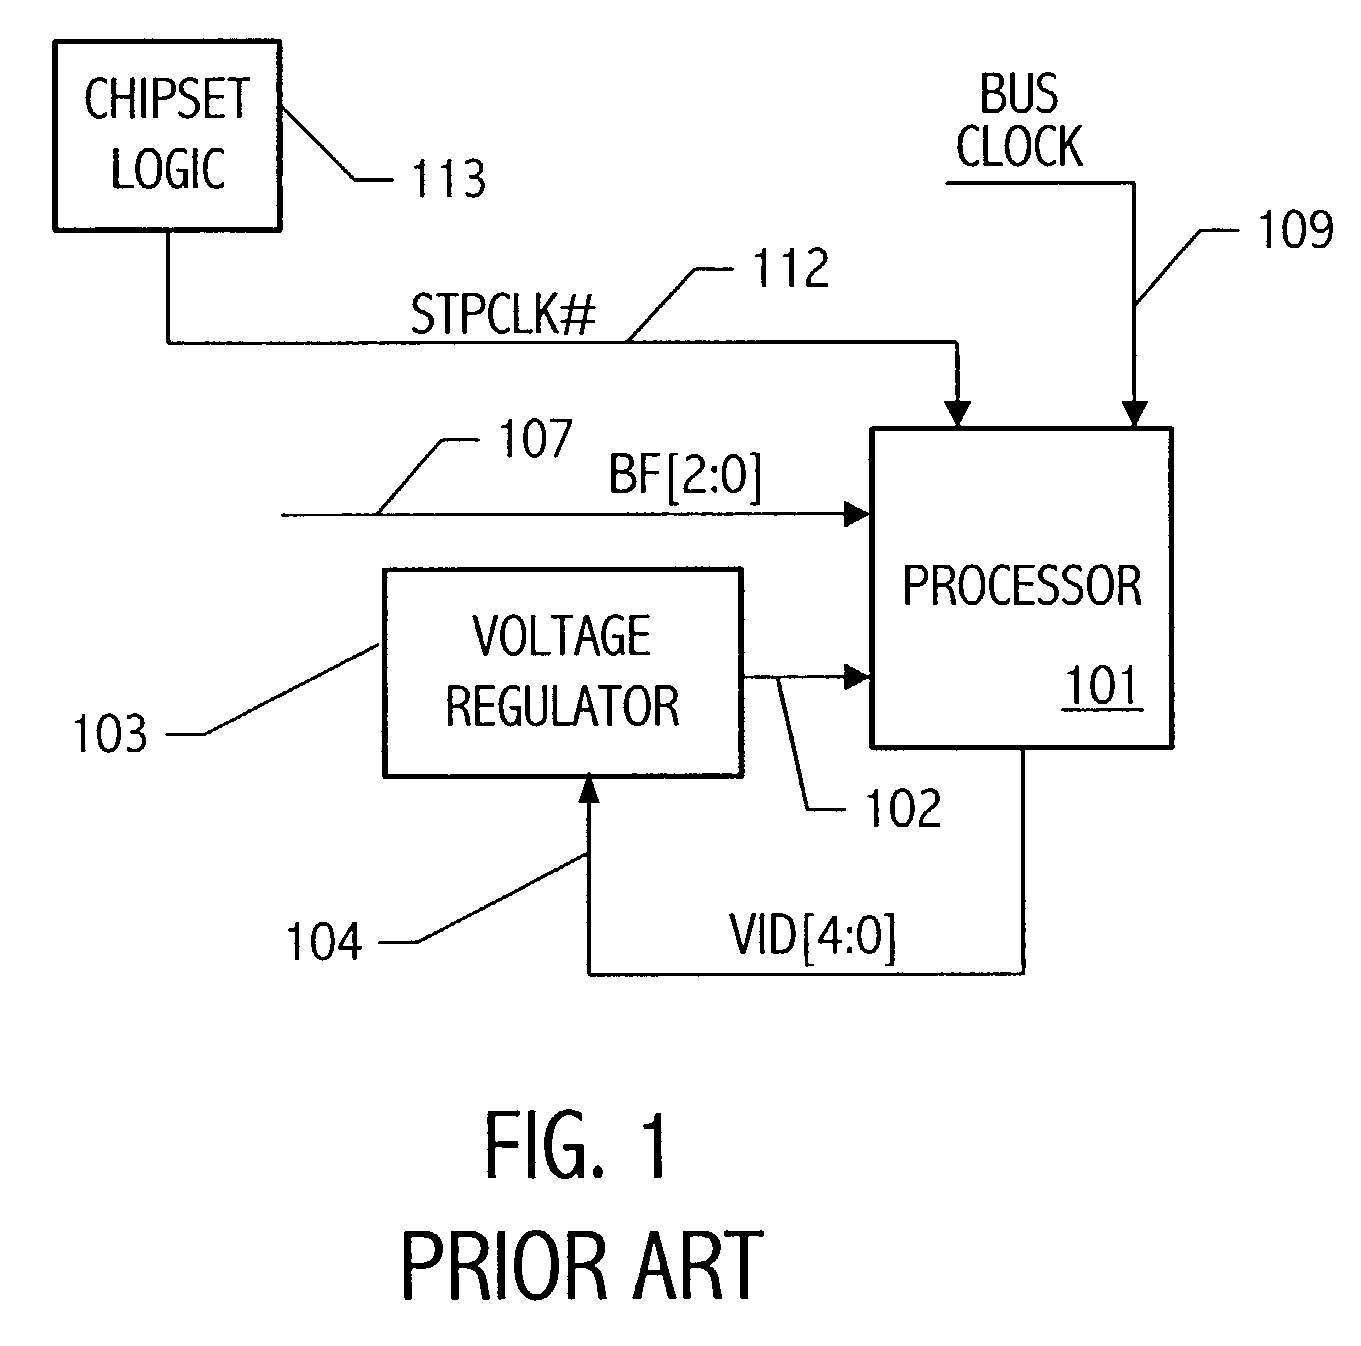 Message based power management in a multi-processor system